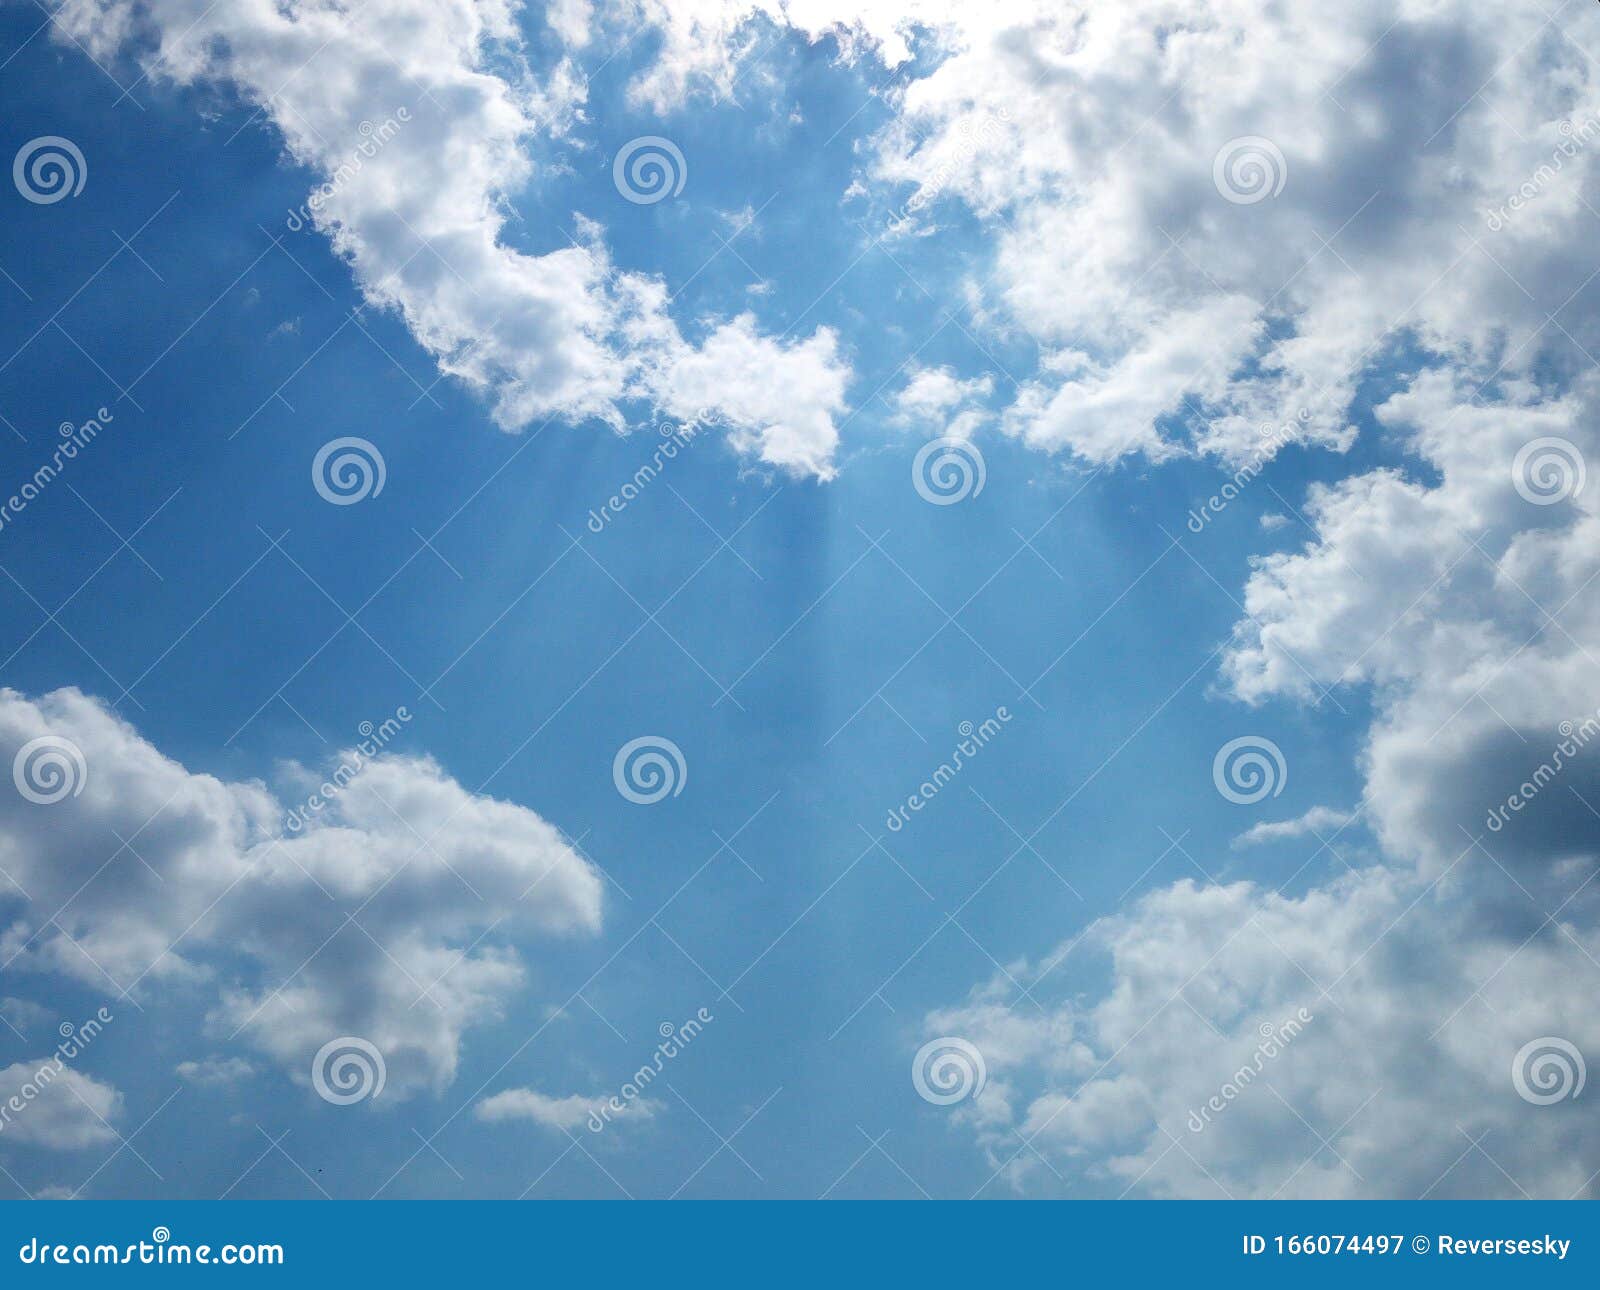 Bright Blue Sky Sun Rays Clouds Stock Image - Image of clouds, bright ...